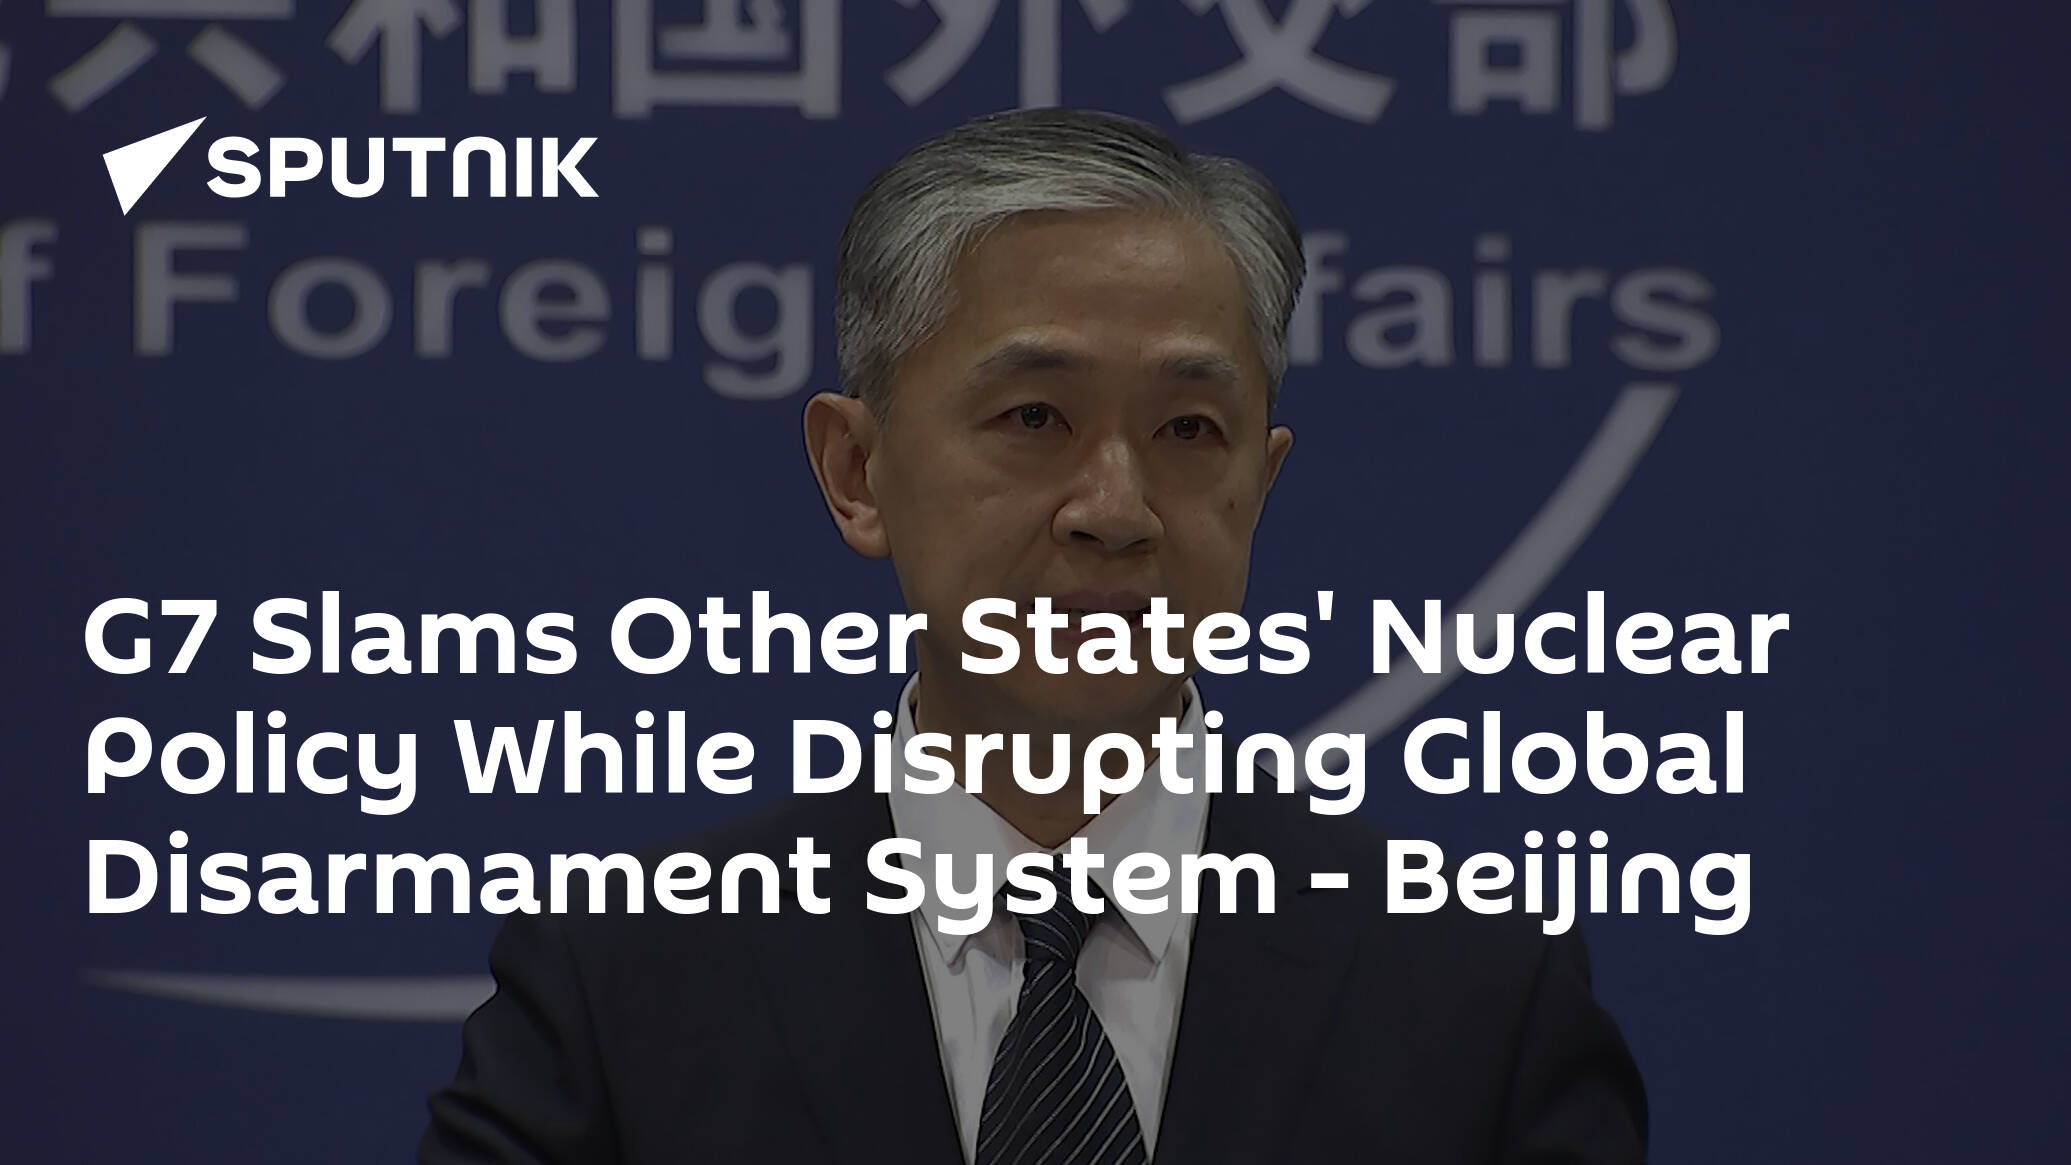 G7 Slams Other States' Nuclear Policy While Disrupting Global Disarmament System – Beijing